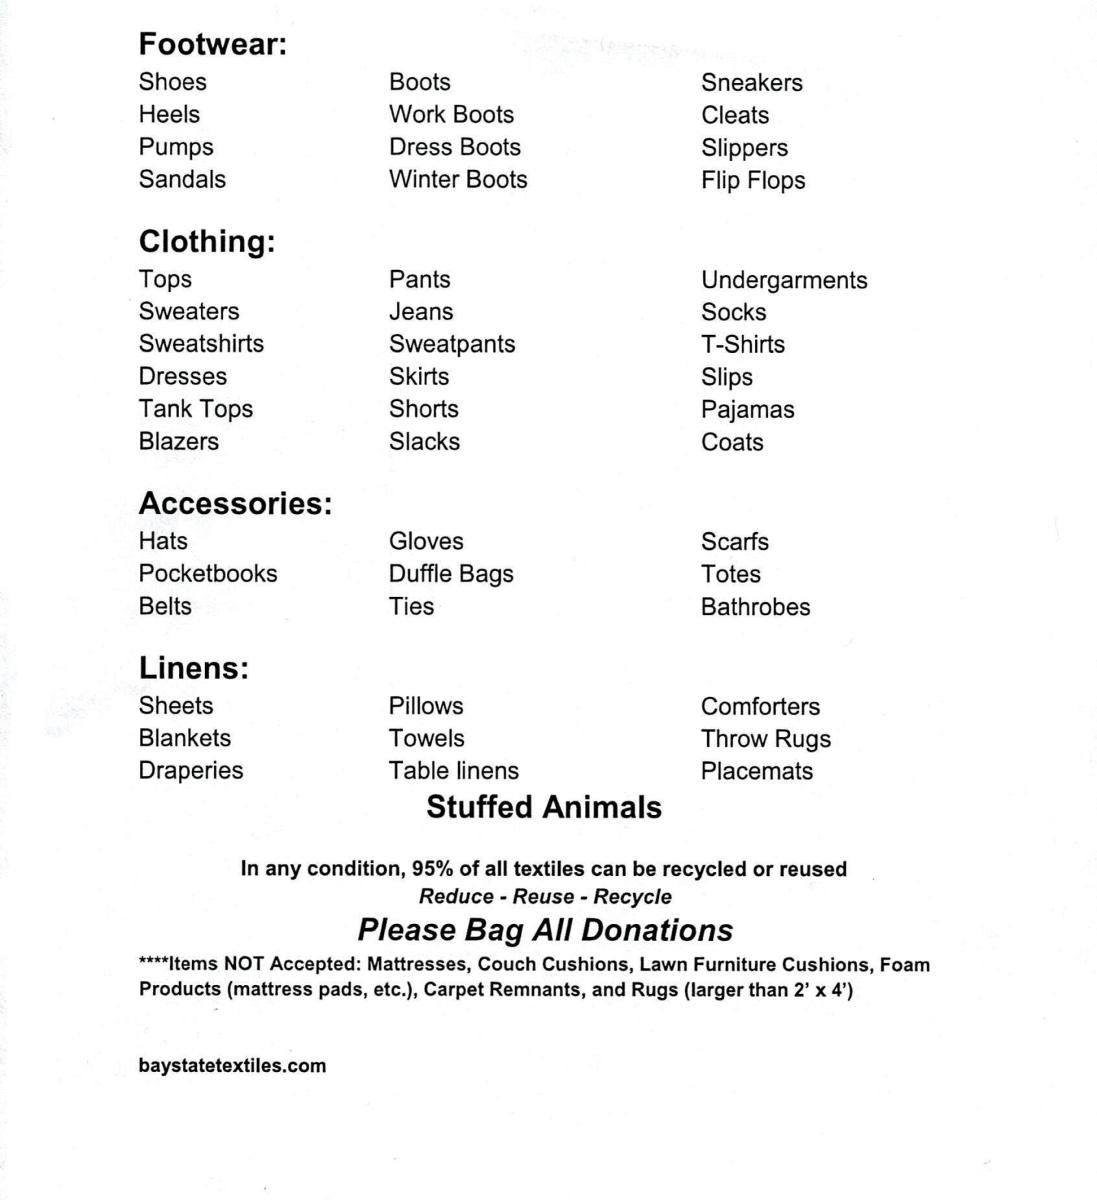 complete list of acceptable items for Bay State Textiles